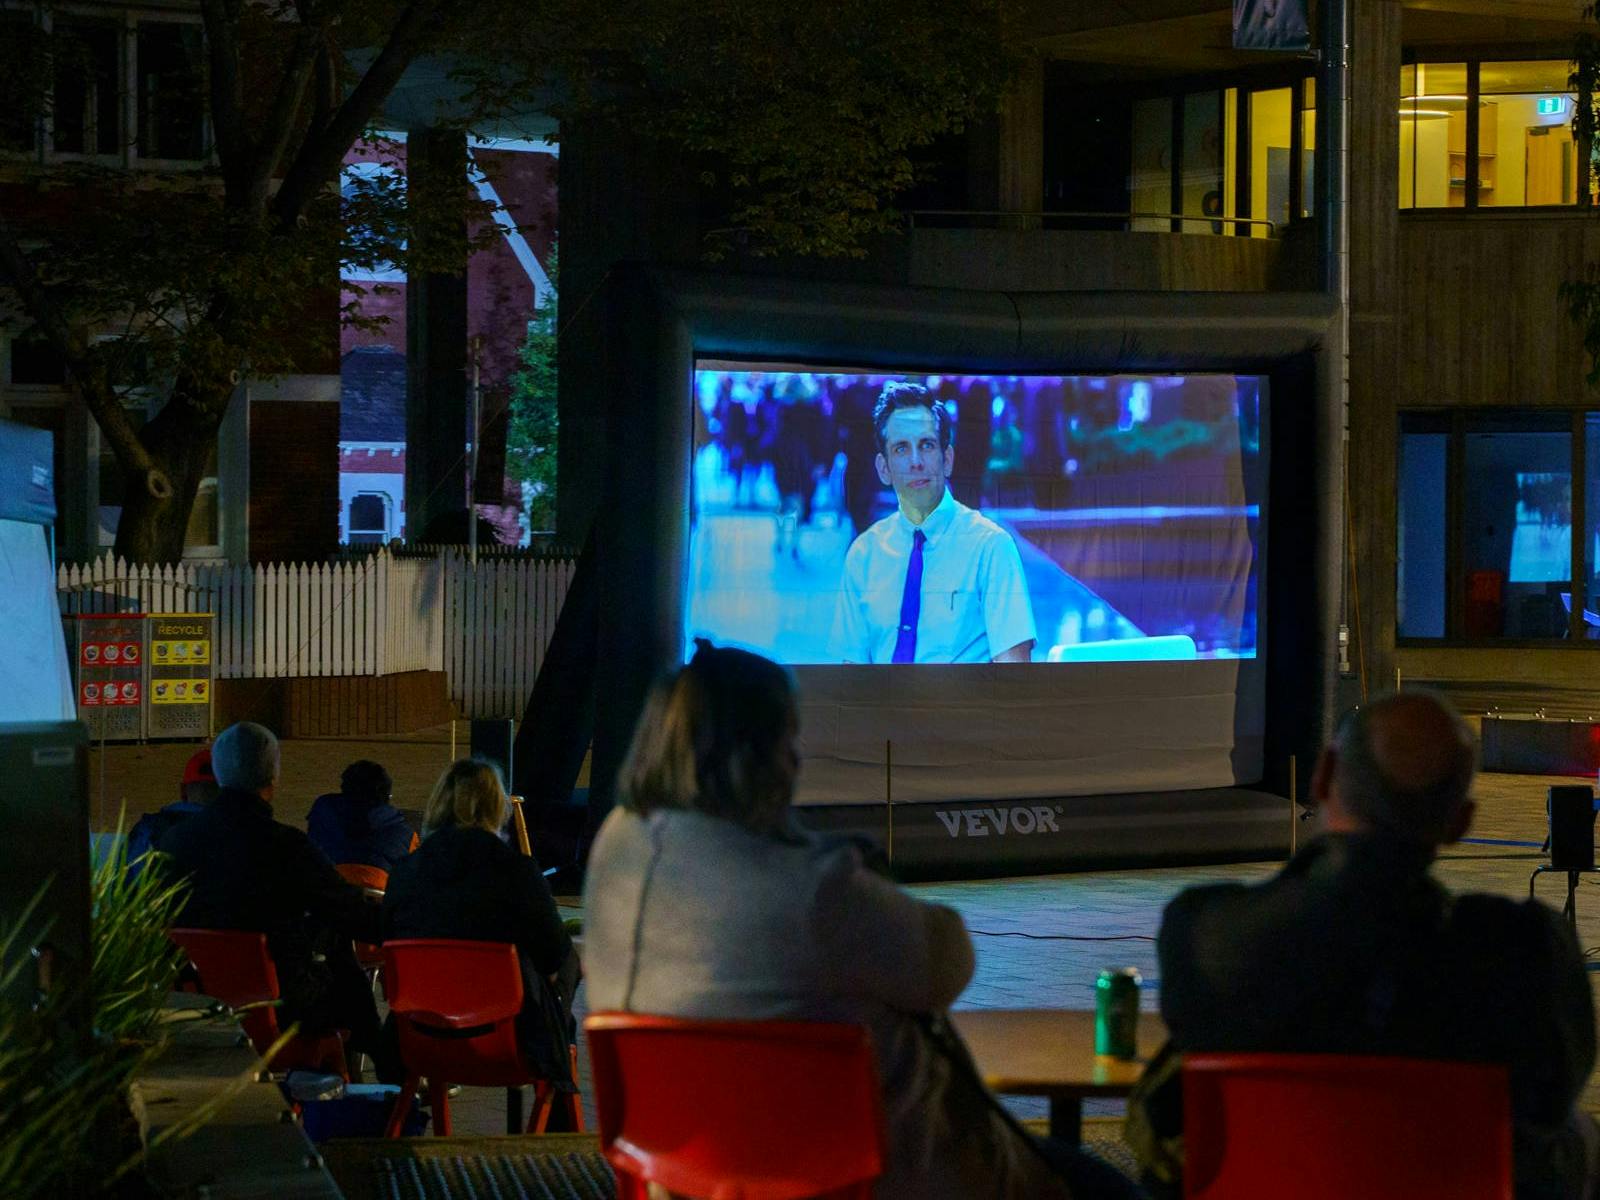 Diners watch a film on the big screen, seated at tables, outdoors.